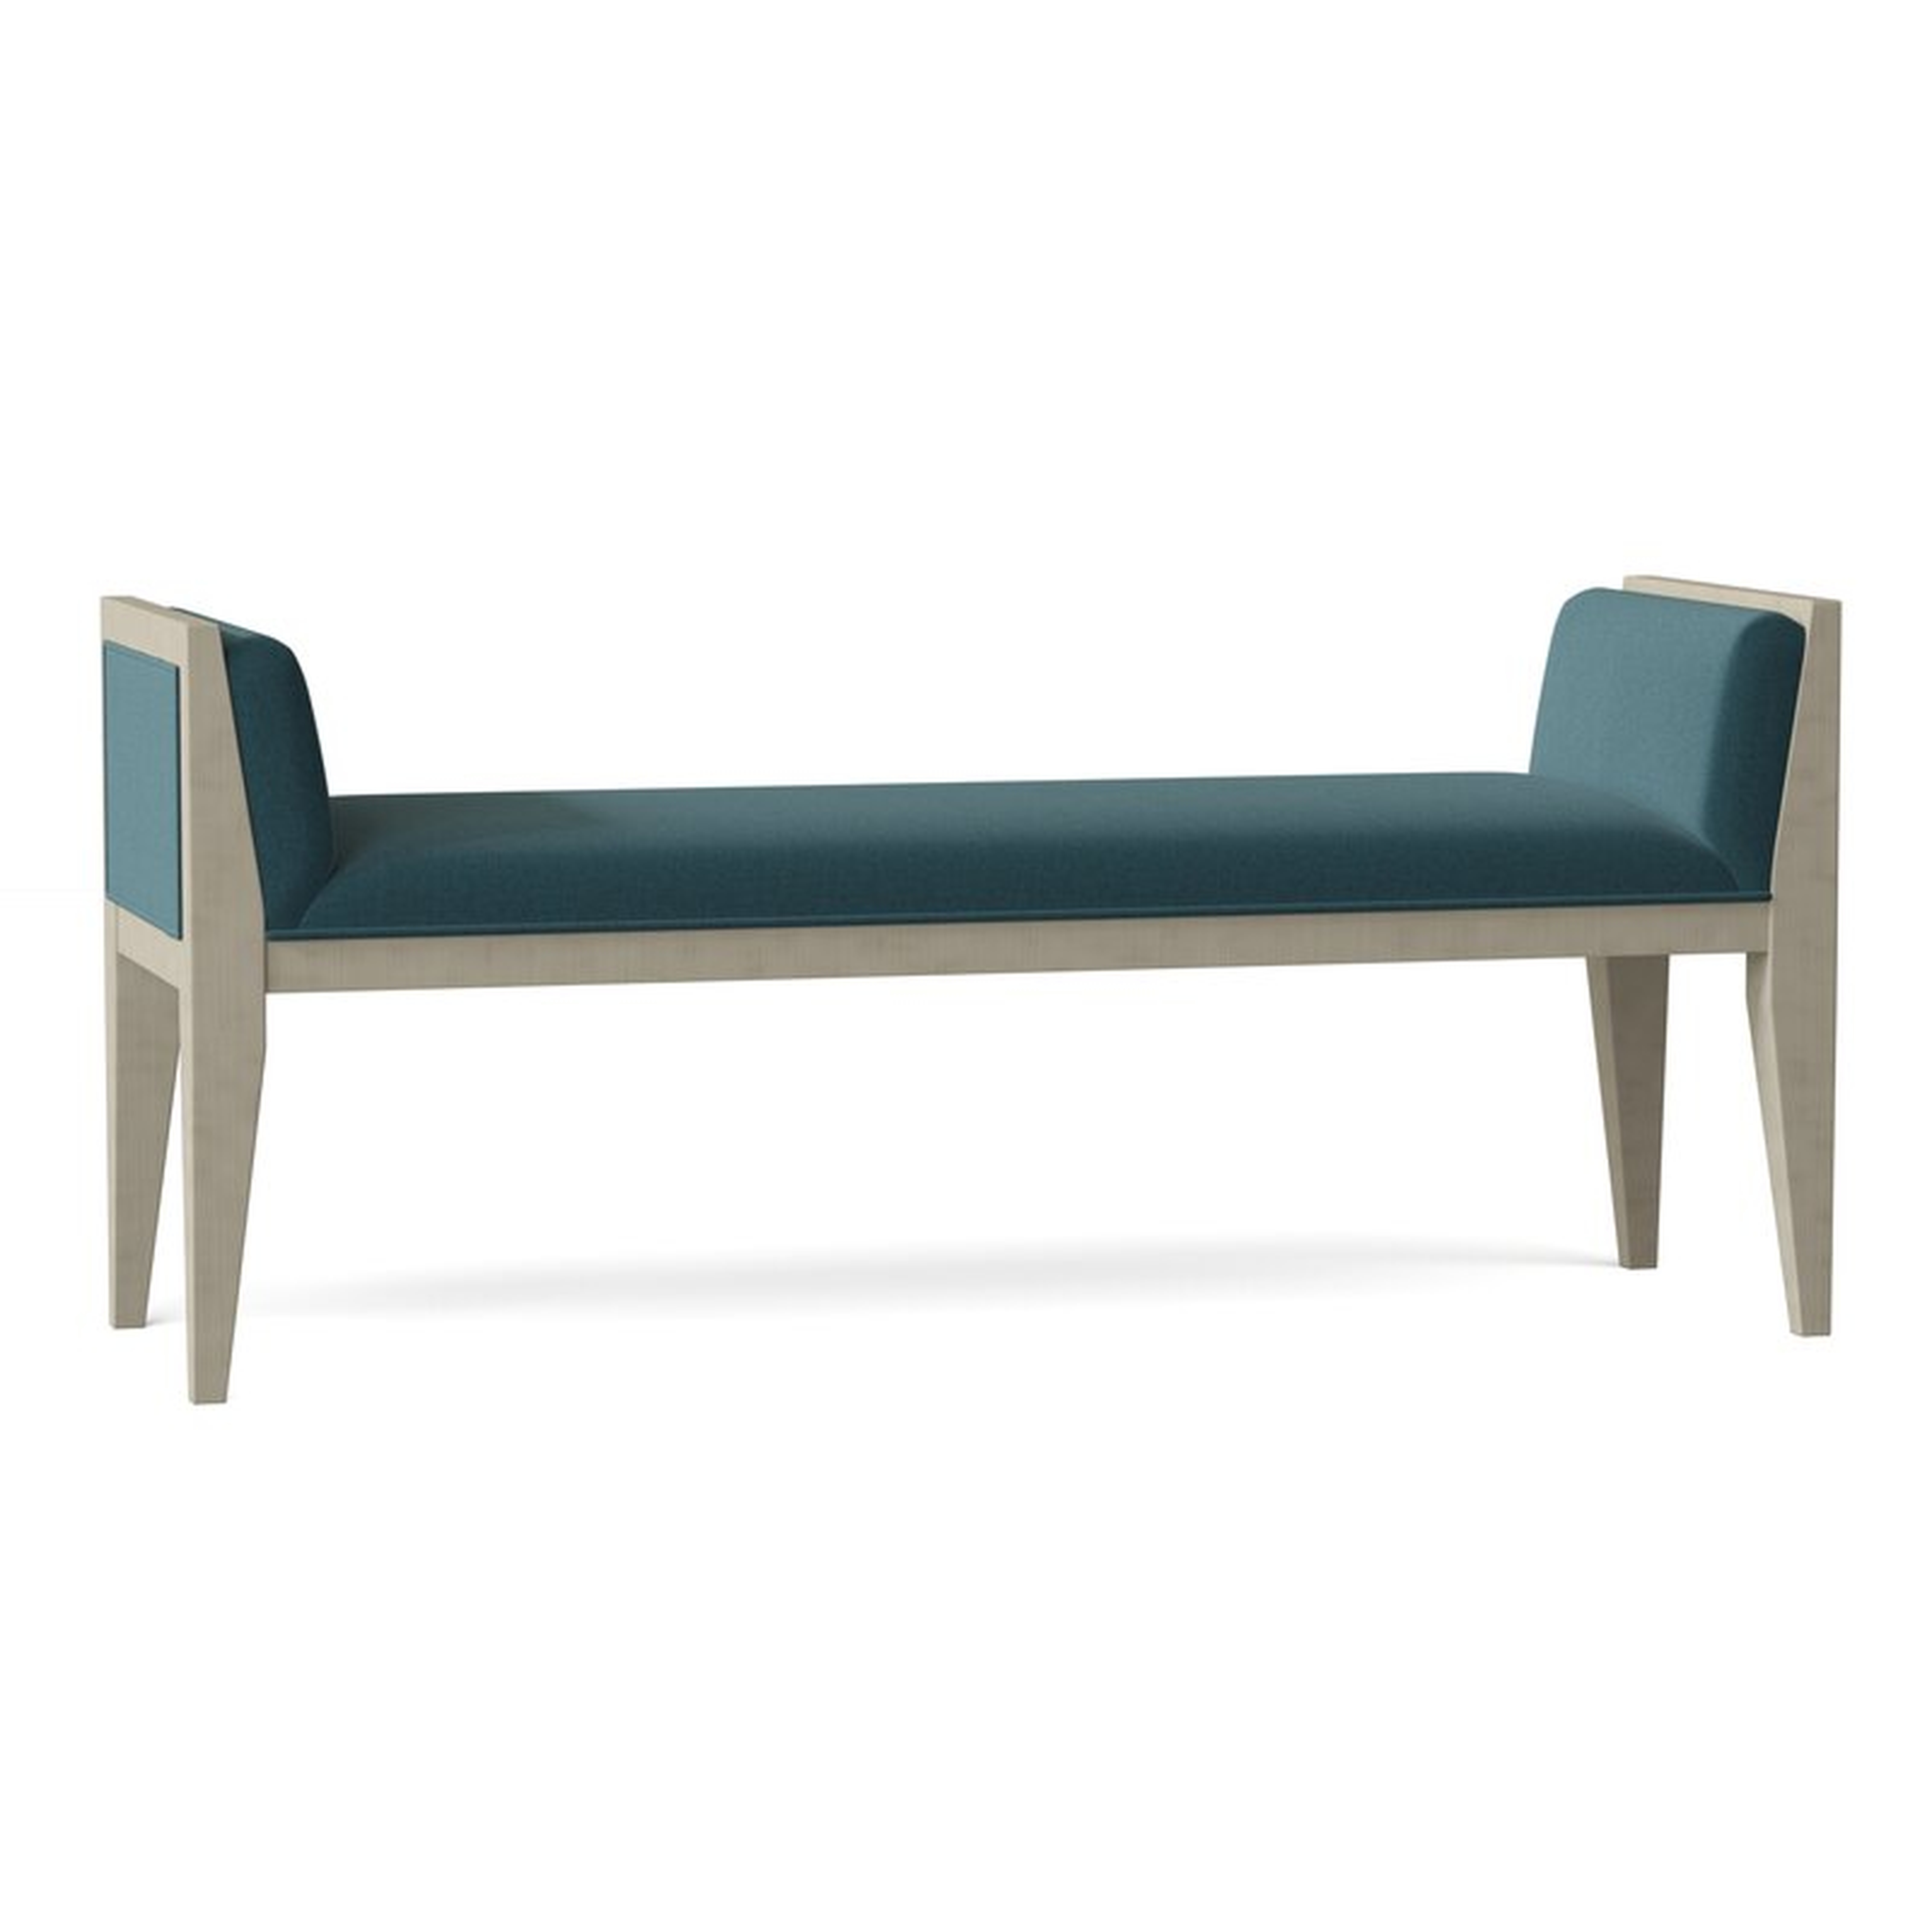 Fairfield Chair Inman Upholstered Bench Body Fabric: 8789 Turquoise, Leg Color: Almond Buff - Perigold